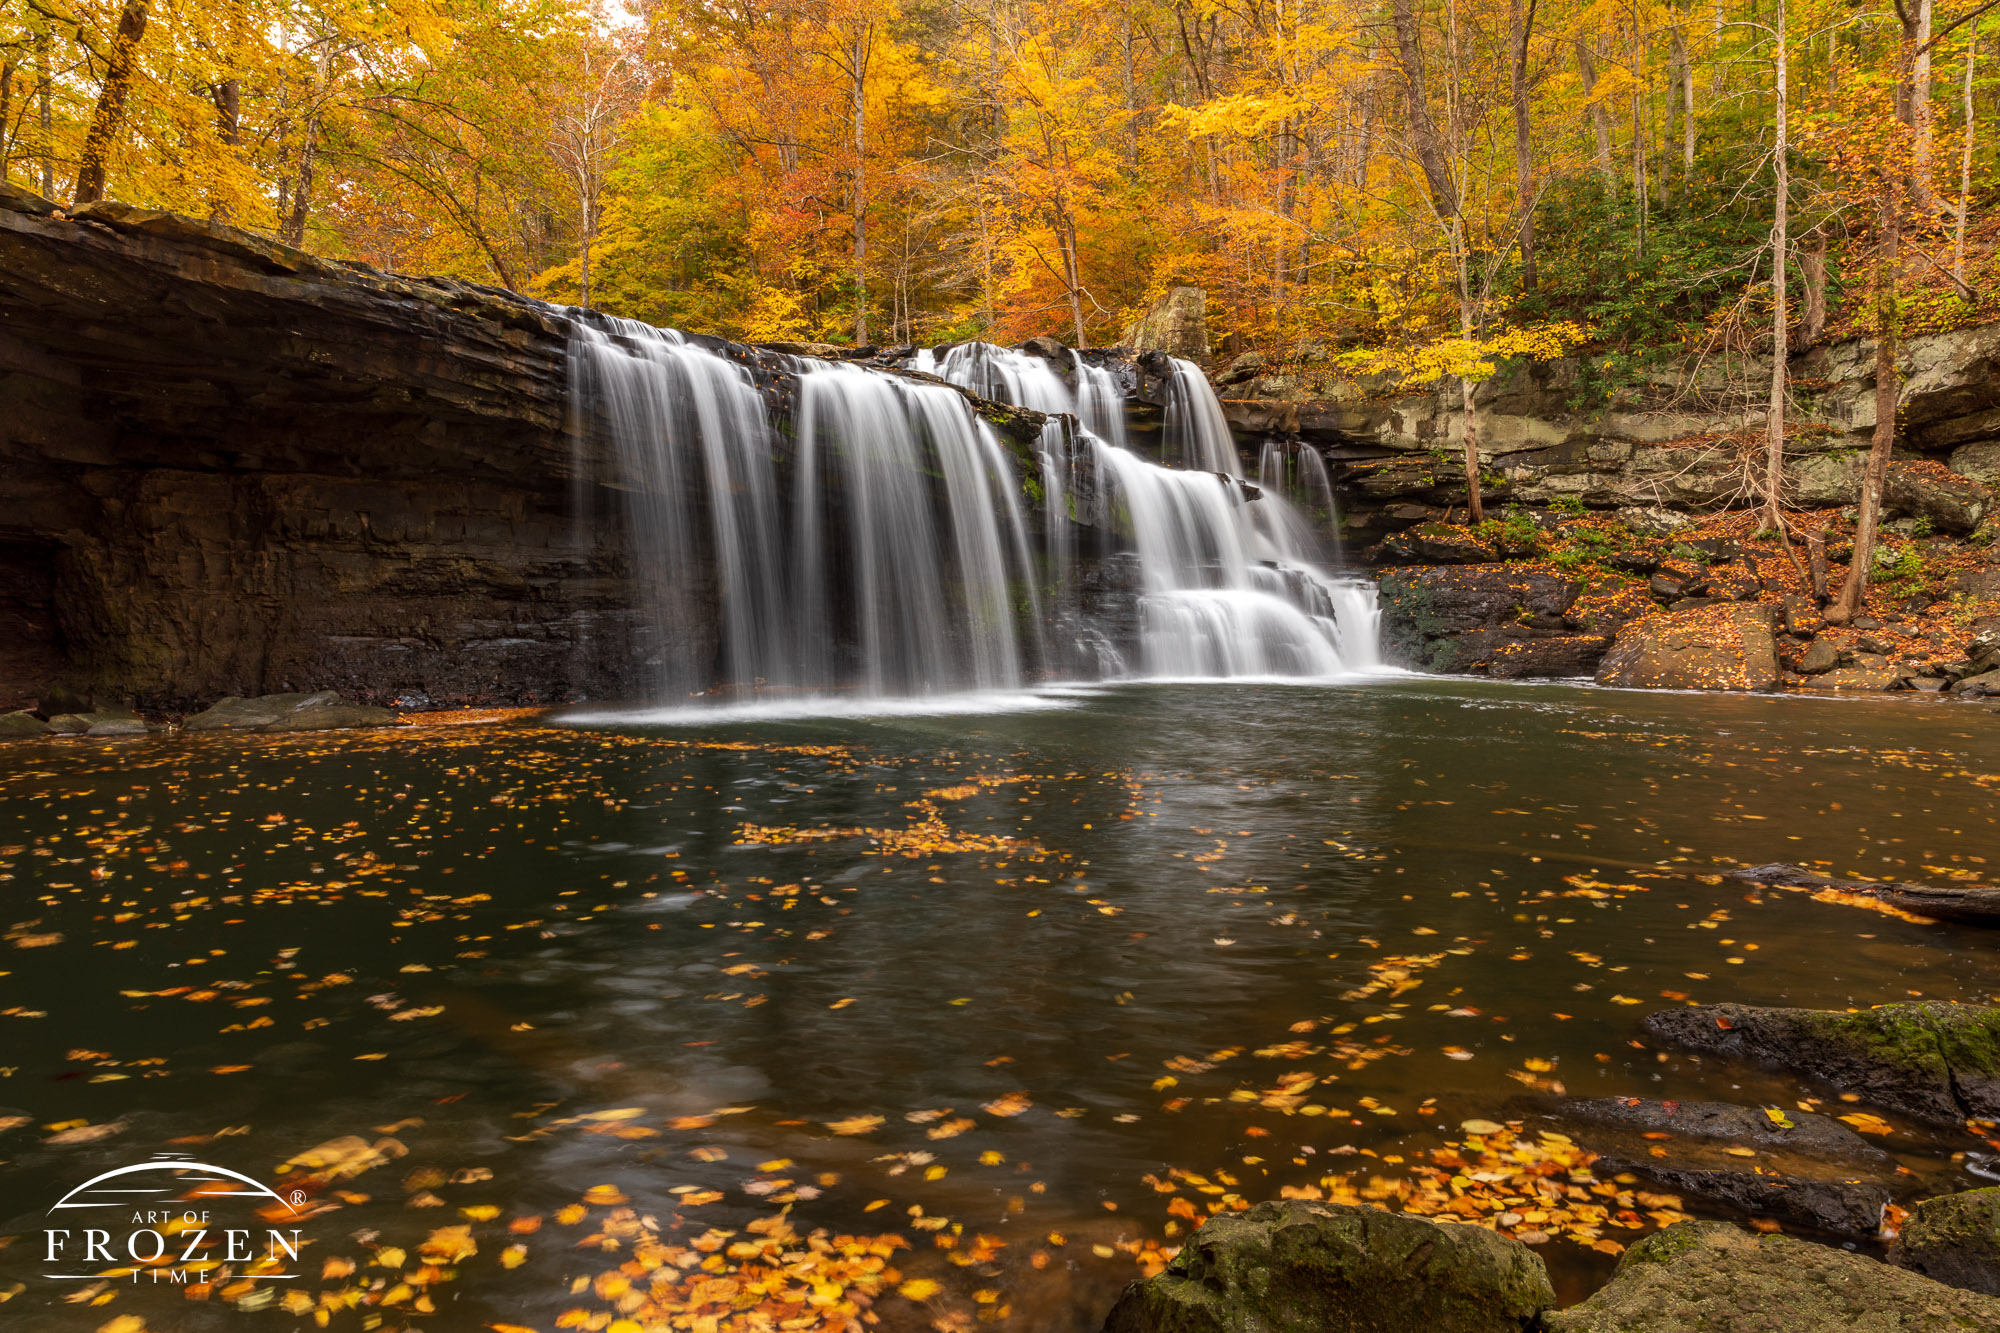 Brush Creek Falls surrounded by autumn-colored leaves where a long exposure rendered the falls with a silky texture